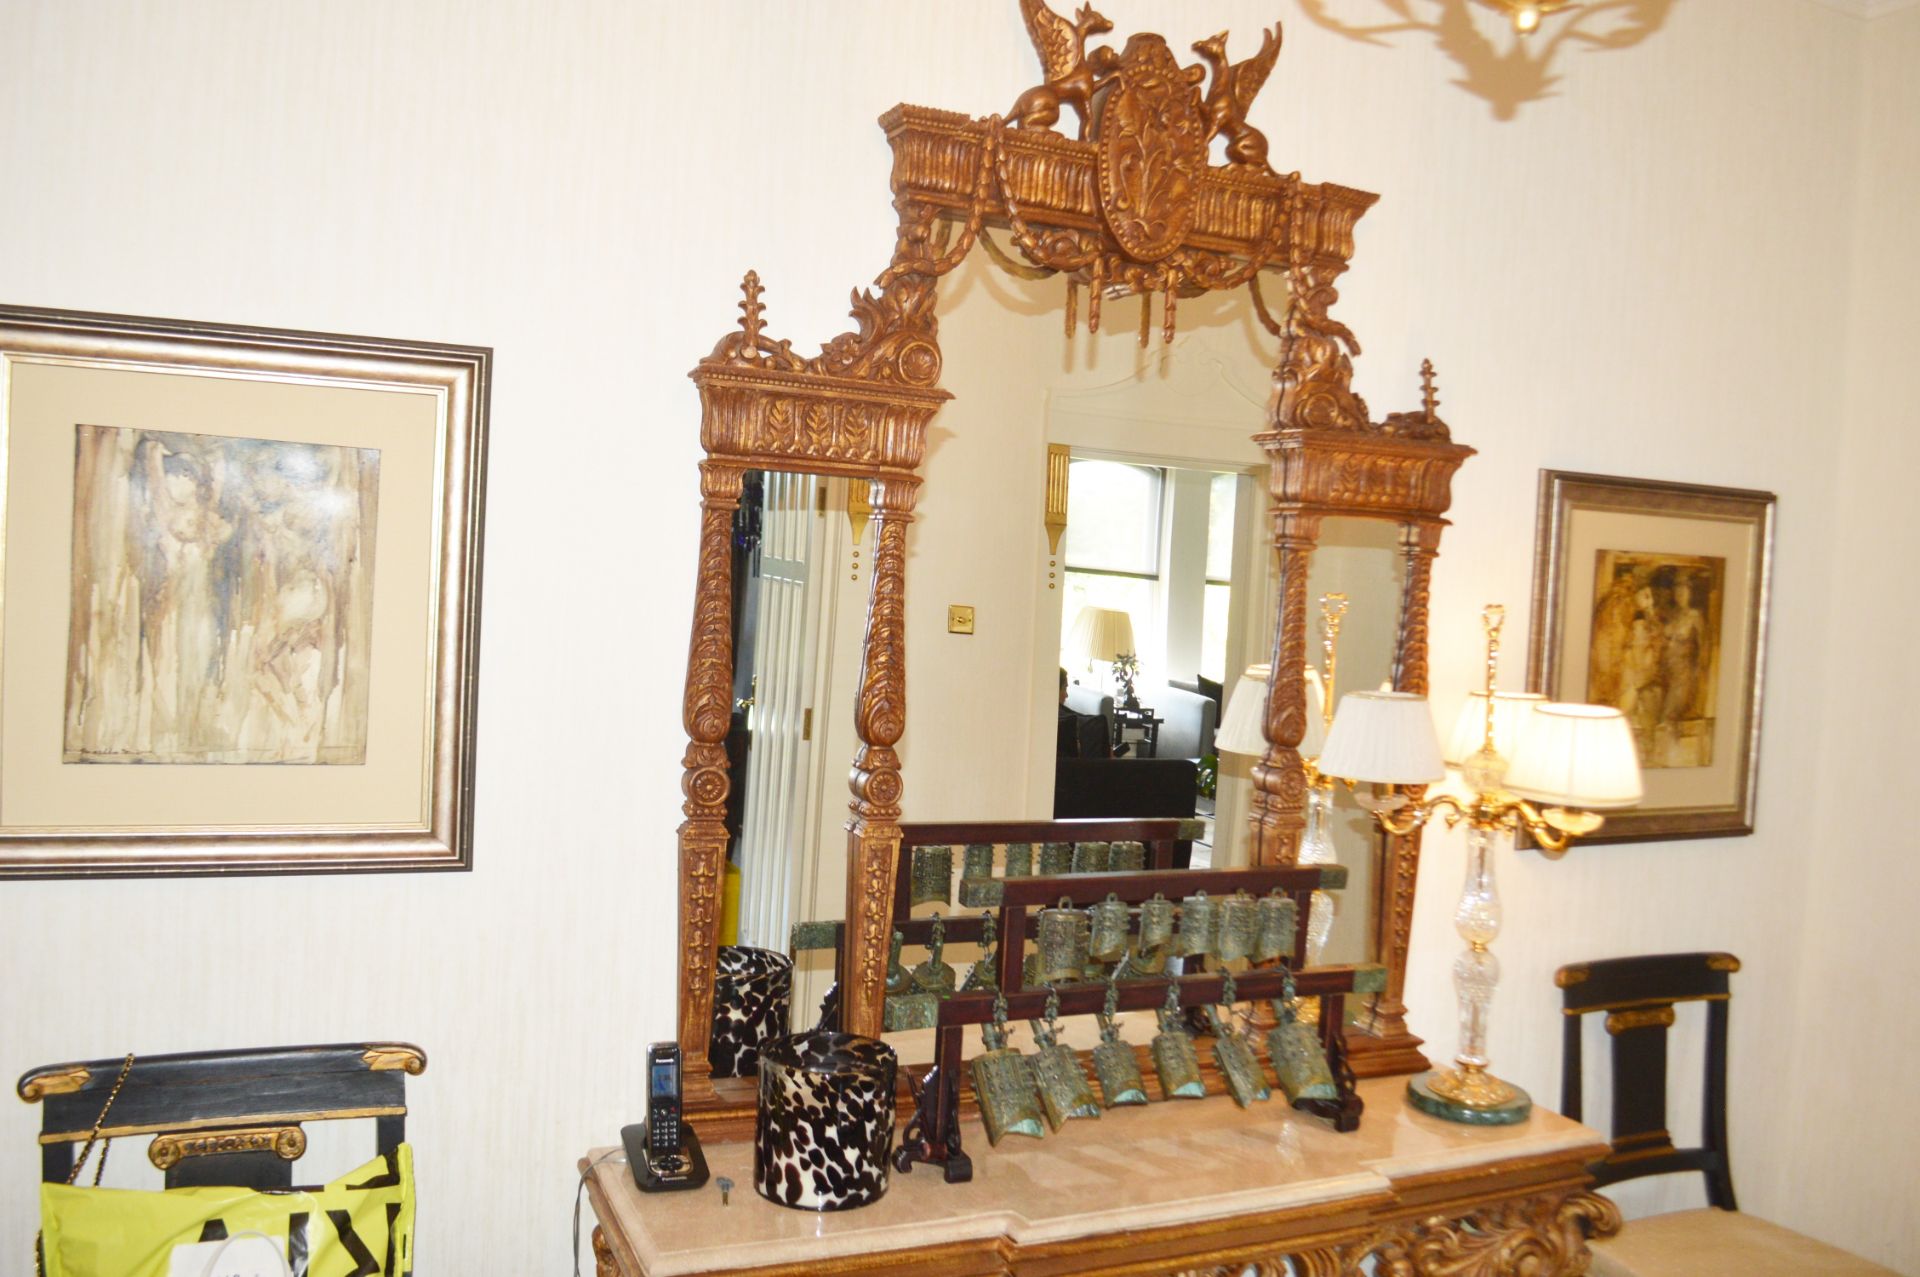 1 x Bespoke Ornate Hand-crafted Console Display Table With Matching Mirror - To Be Removed From An - Image 4 of 6